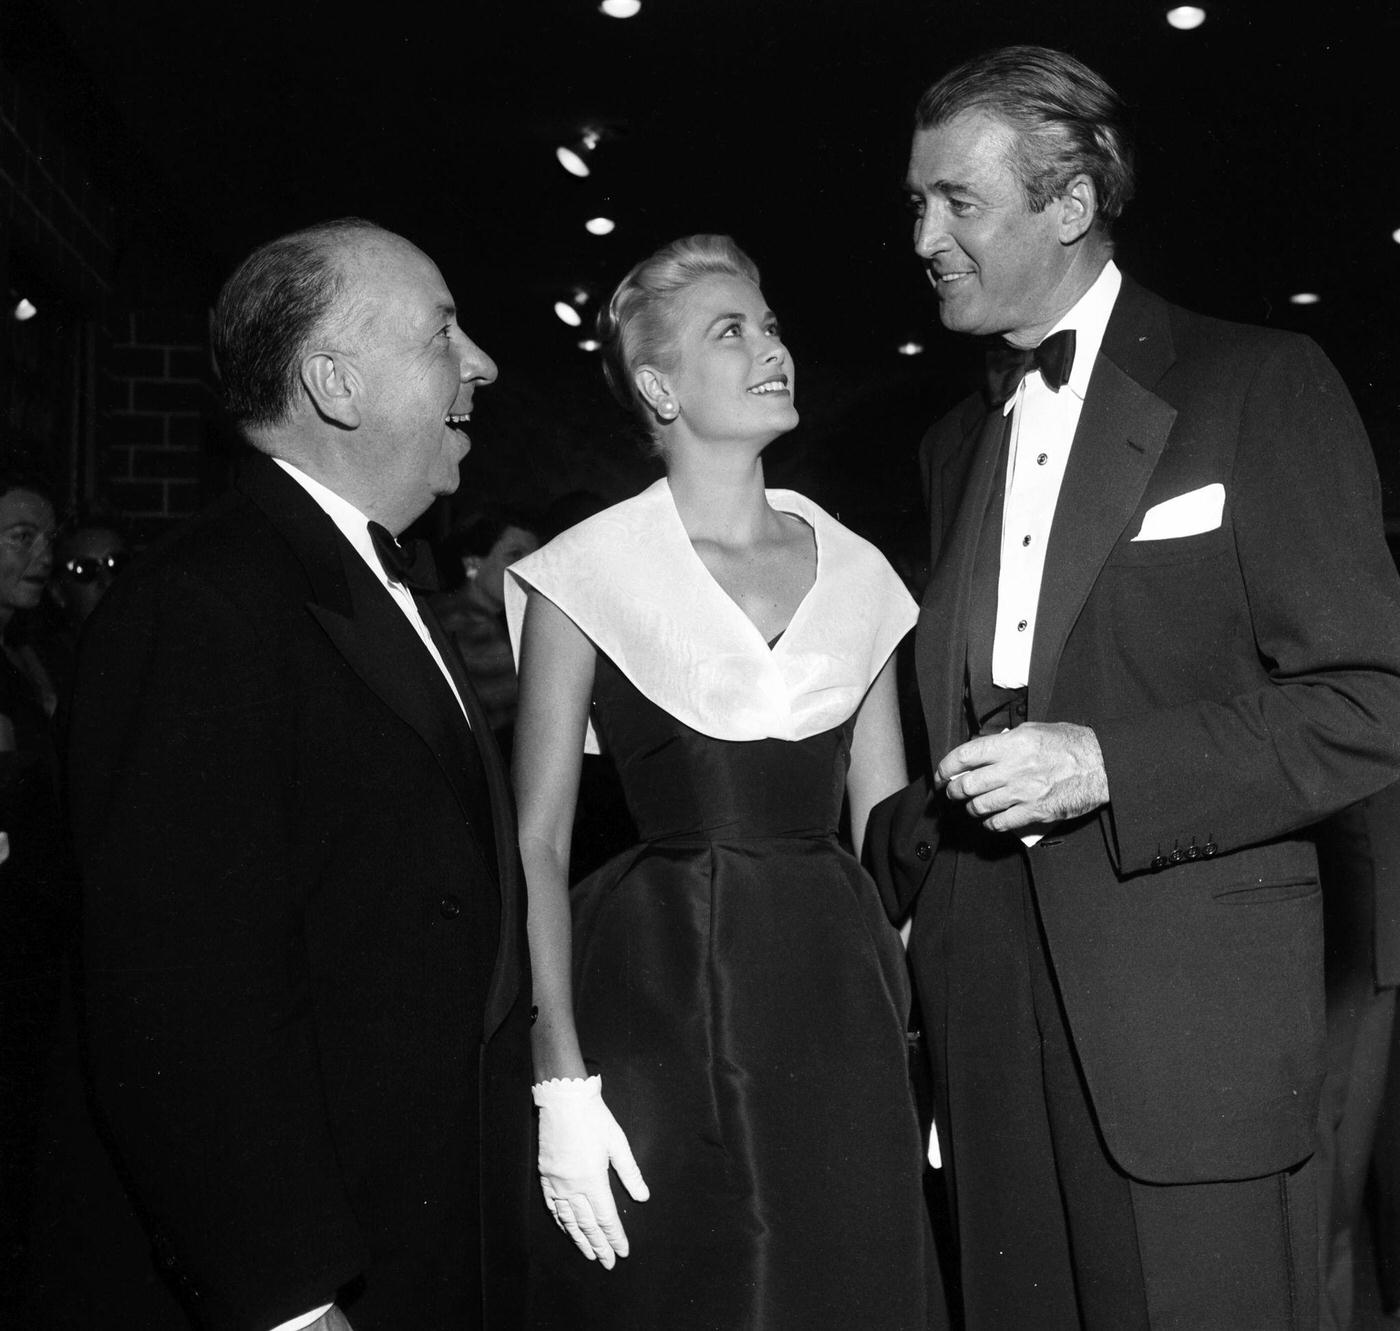 Alfred Hitchcock with Grace Kelly and Jimmy Stewart at the premier of "Rear Window"